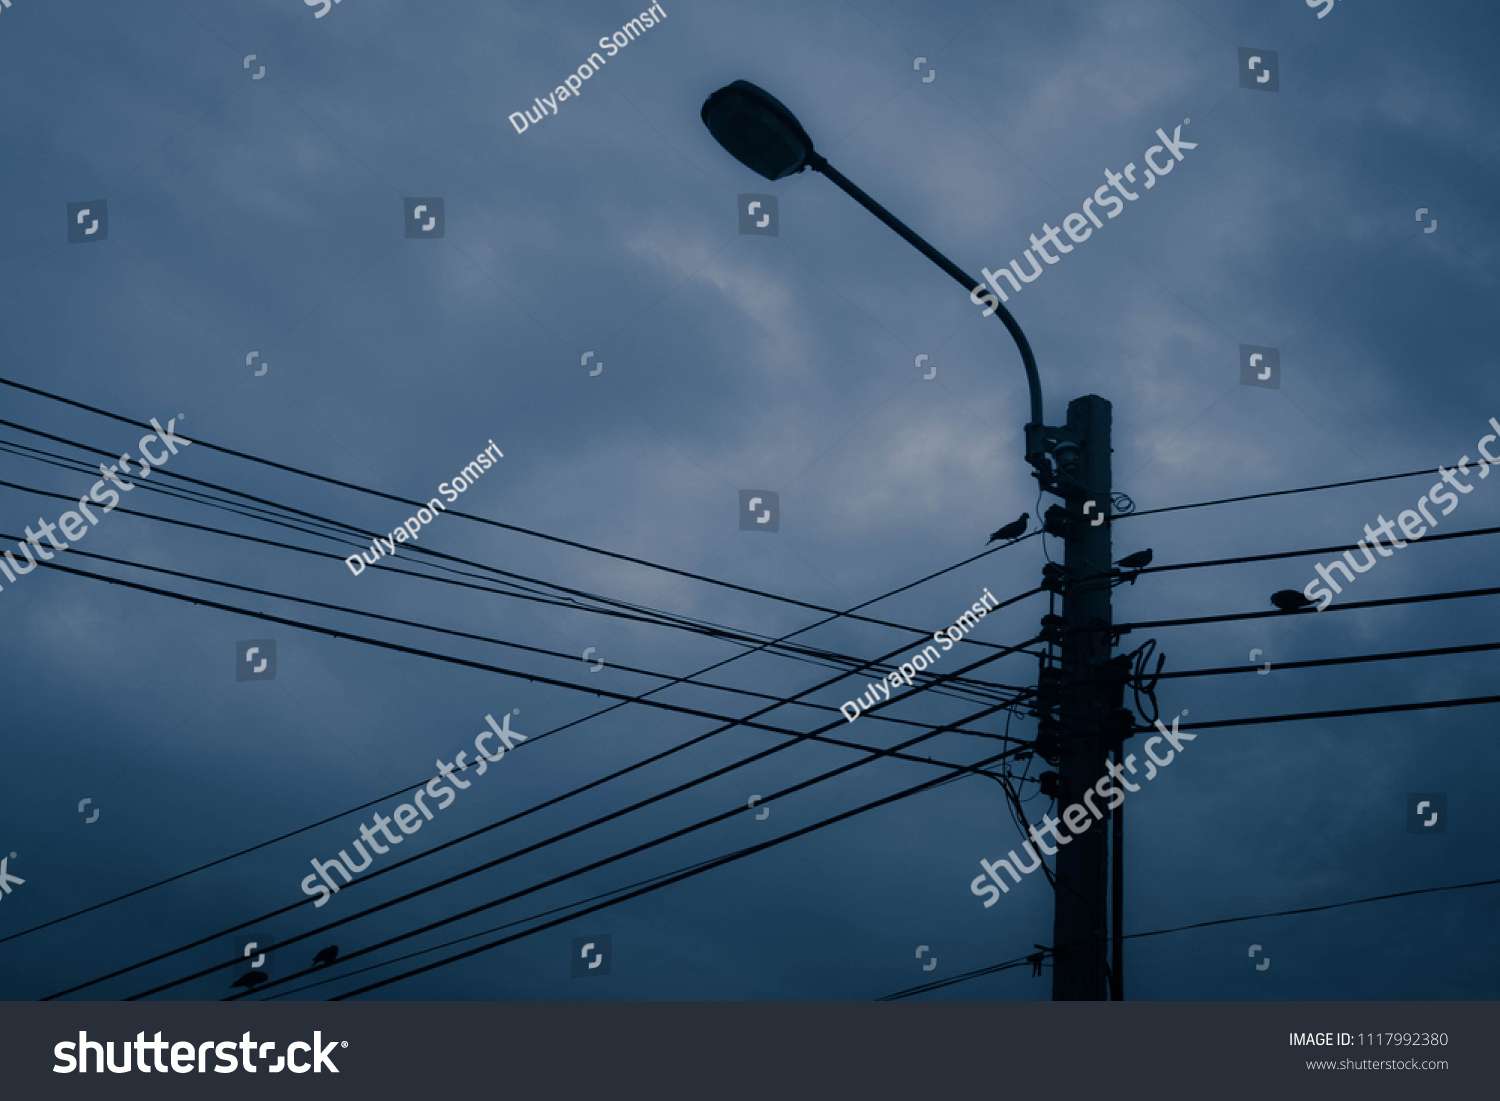 Electricity wire and pole with dark blue clouds and sky background #1117992380